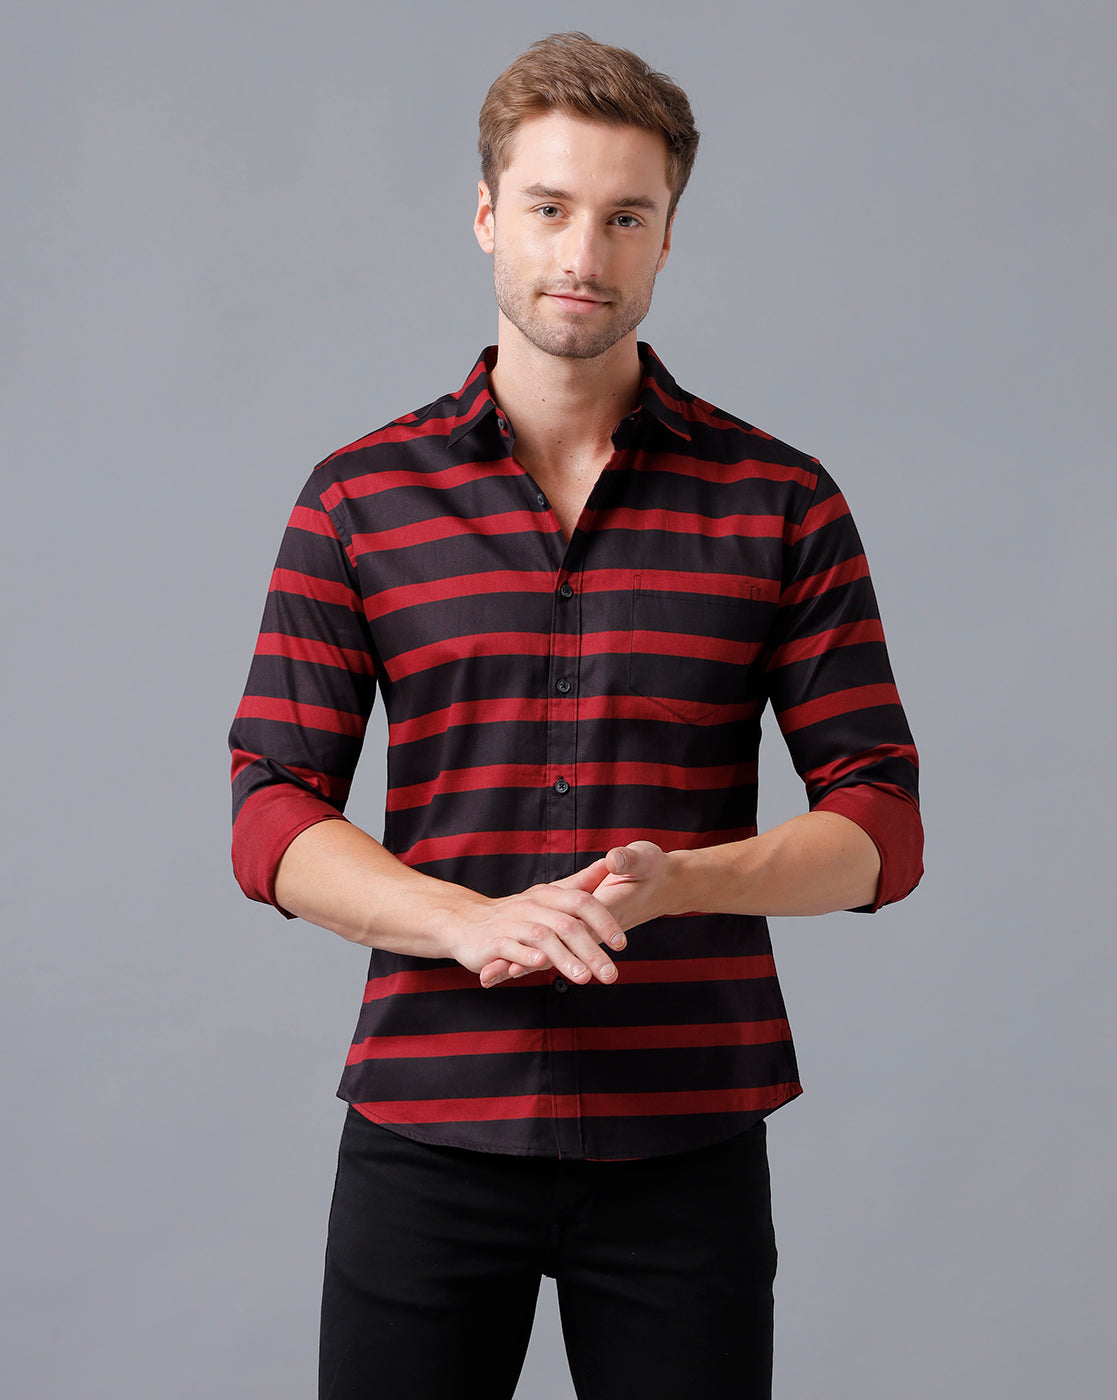 Red and black striped shirt